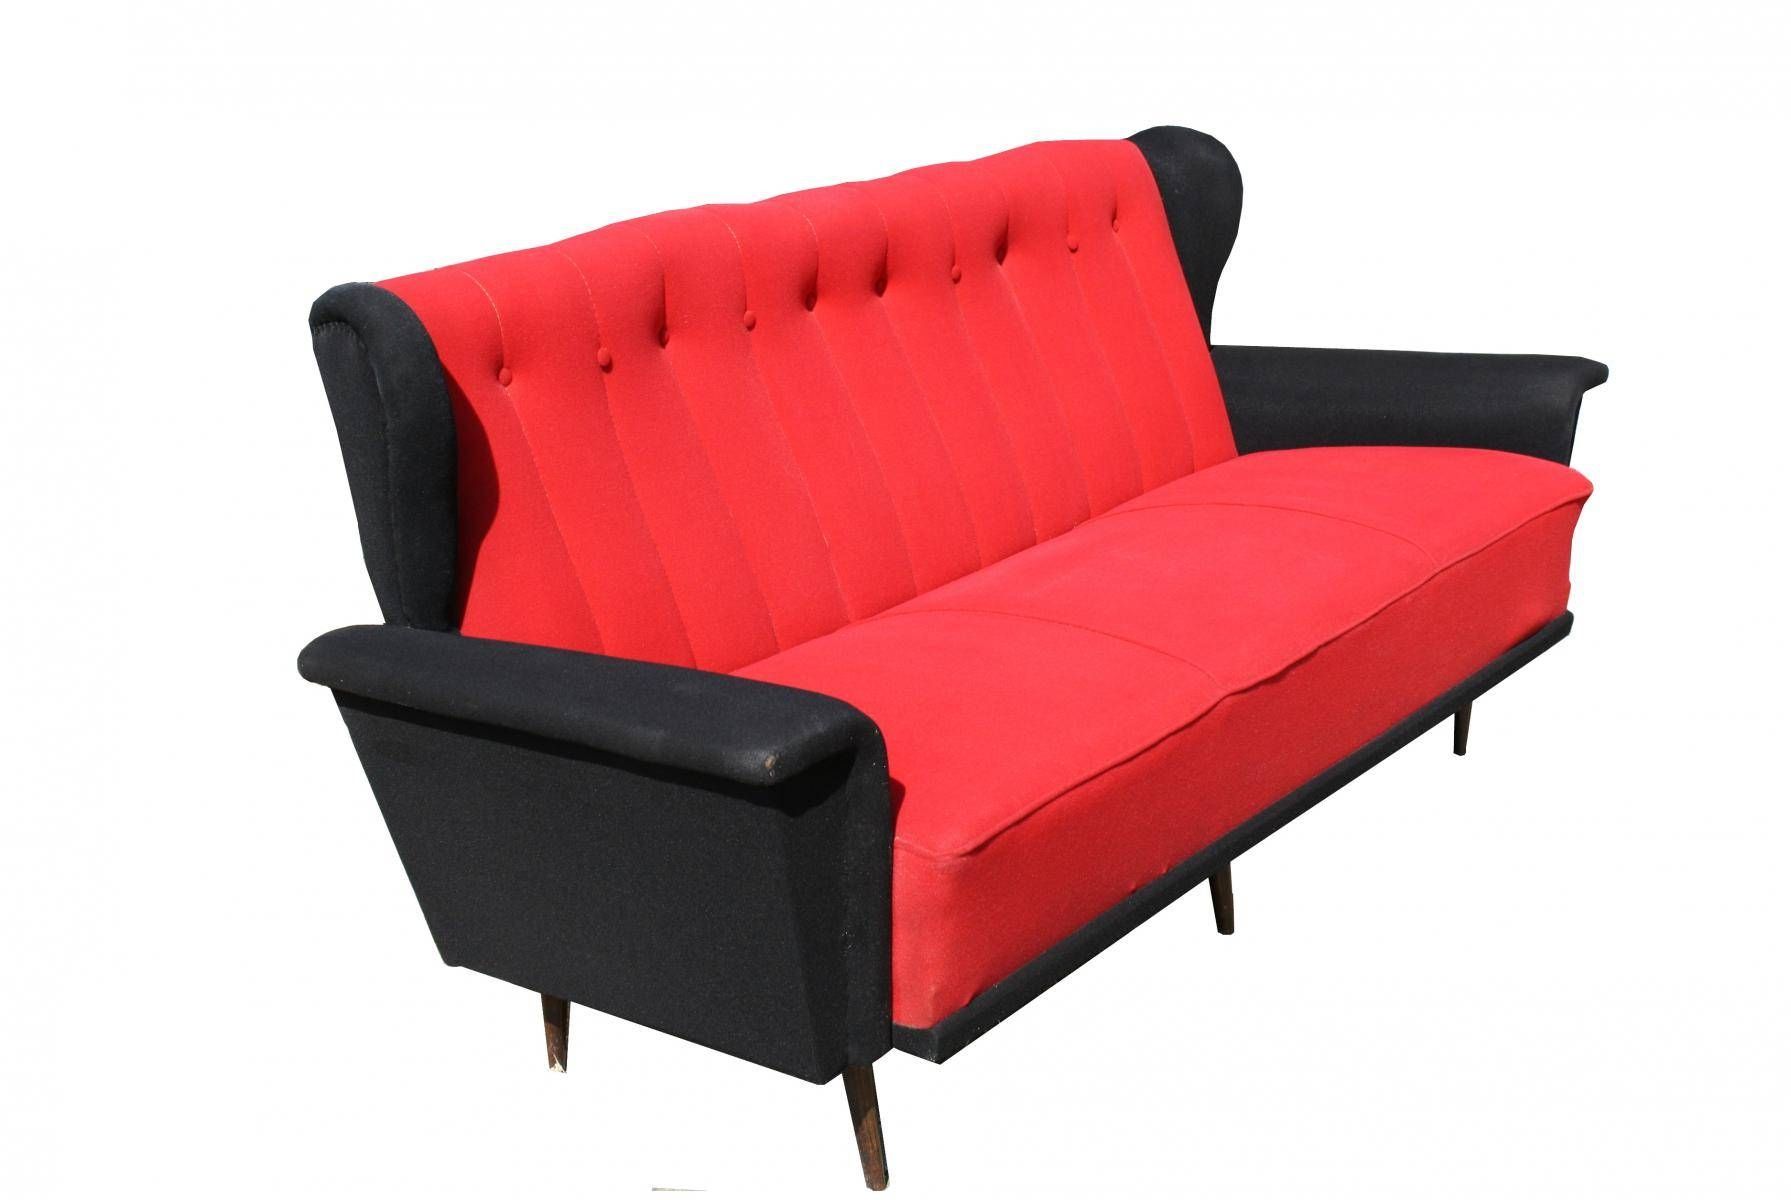 Vintage Red & Black Sofa, 1950s For Sale At Pamono Regarding Sofa Red And Black (View 22 of 25)